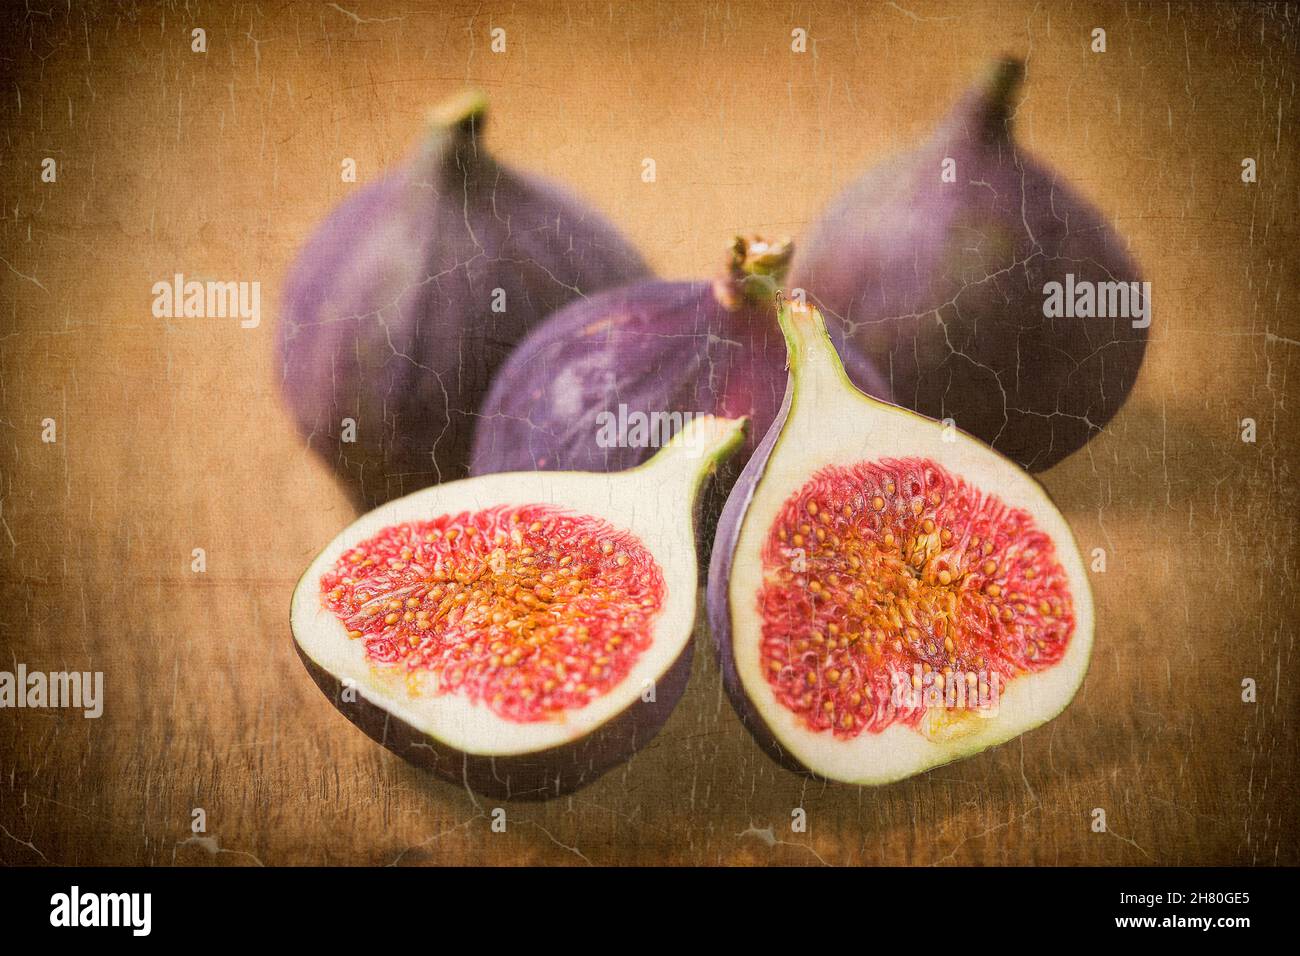 food still life, three figs and one sliced juicy fig in the foreground, textured for artistic effect and old painting effect Stock Photo